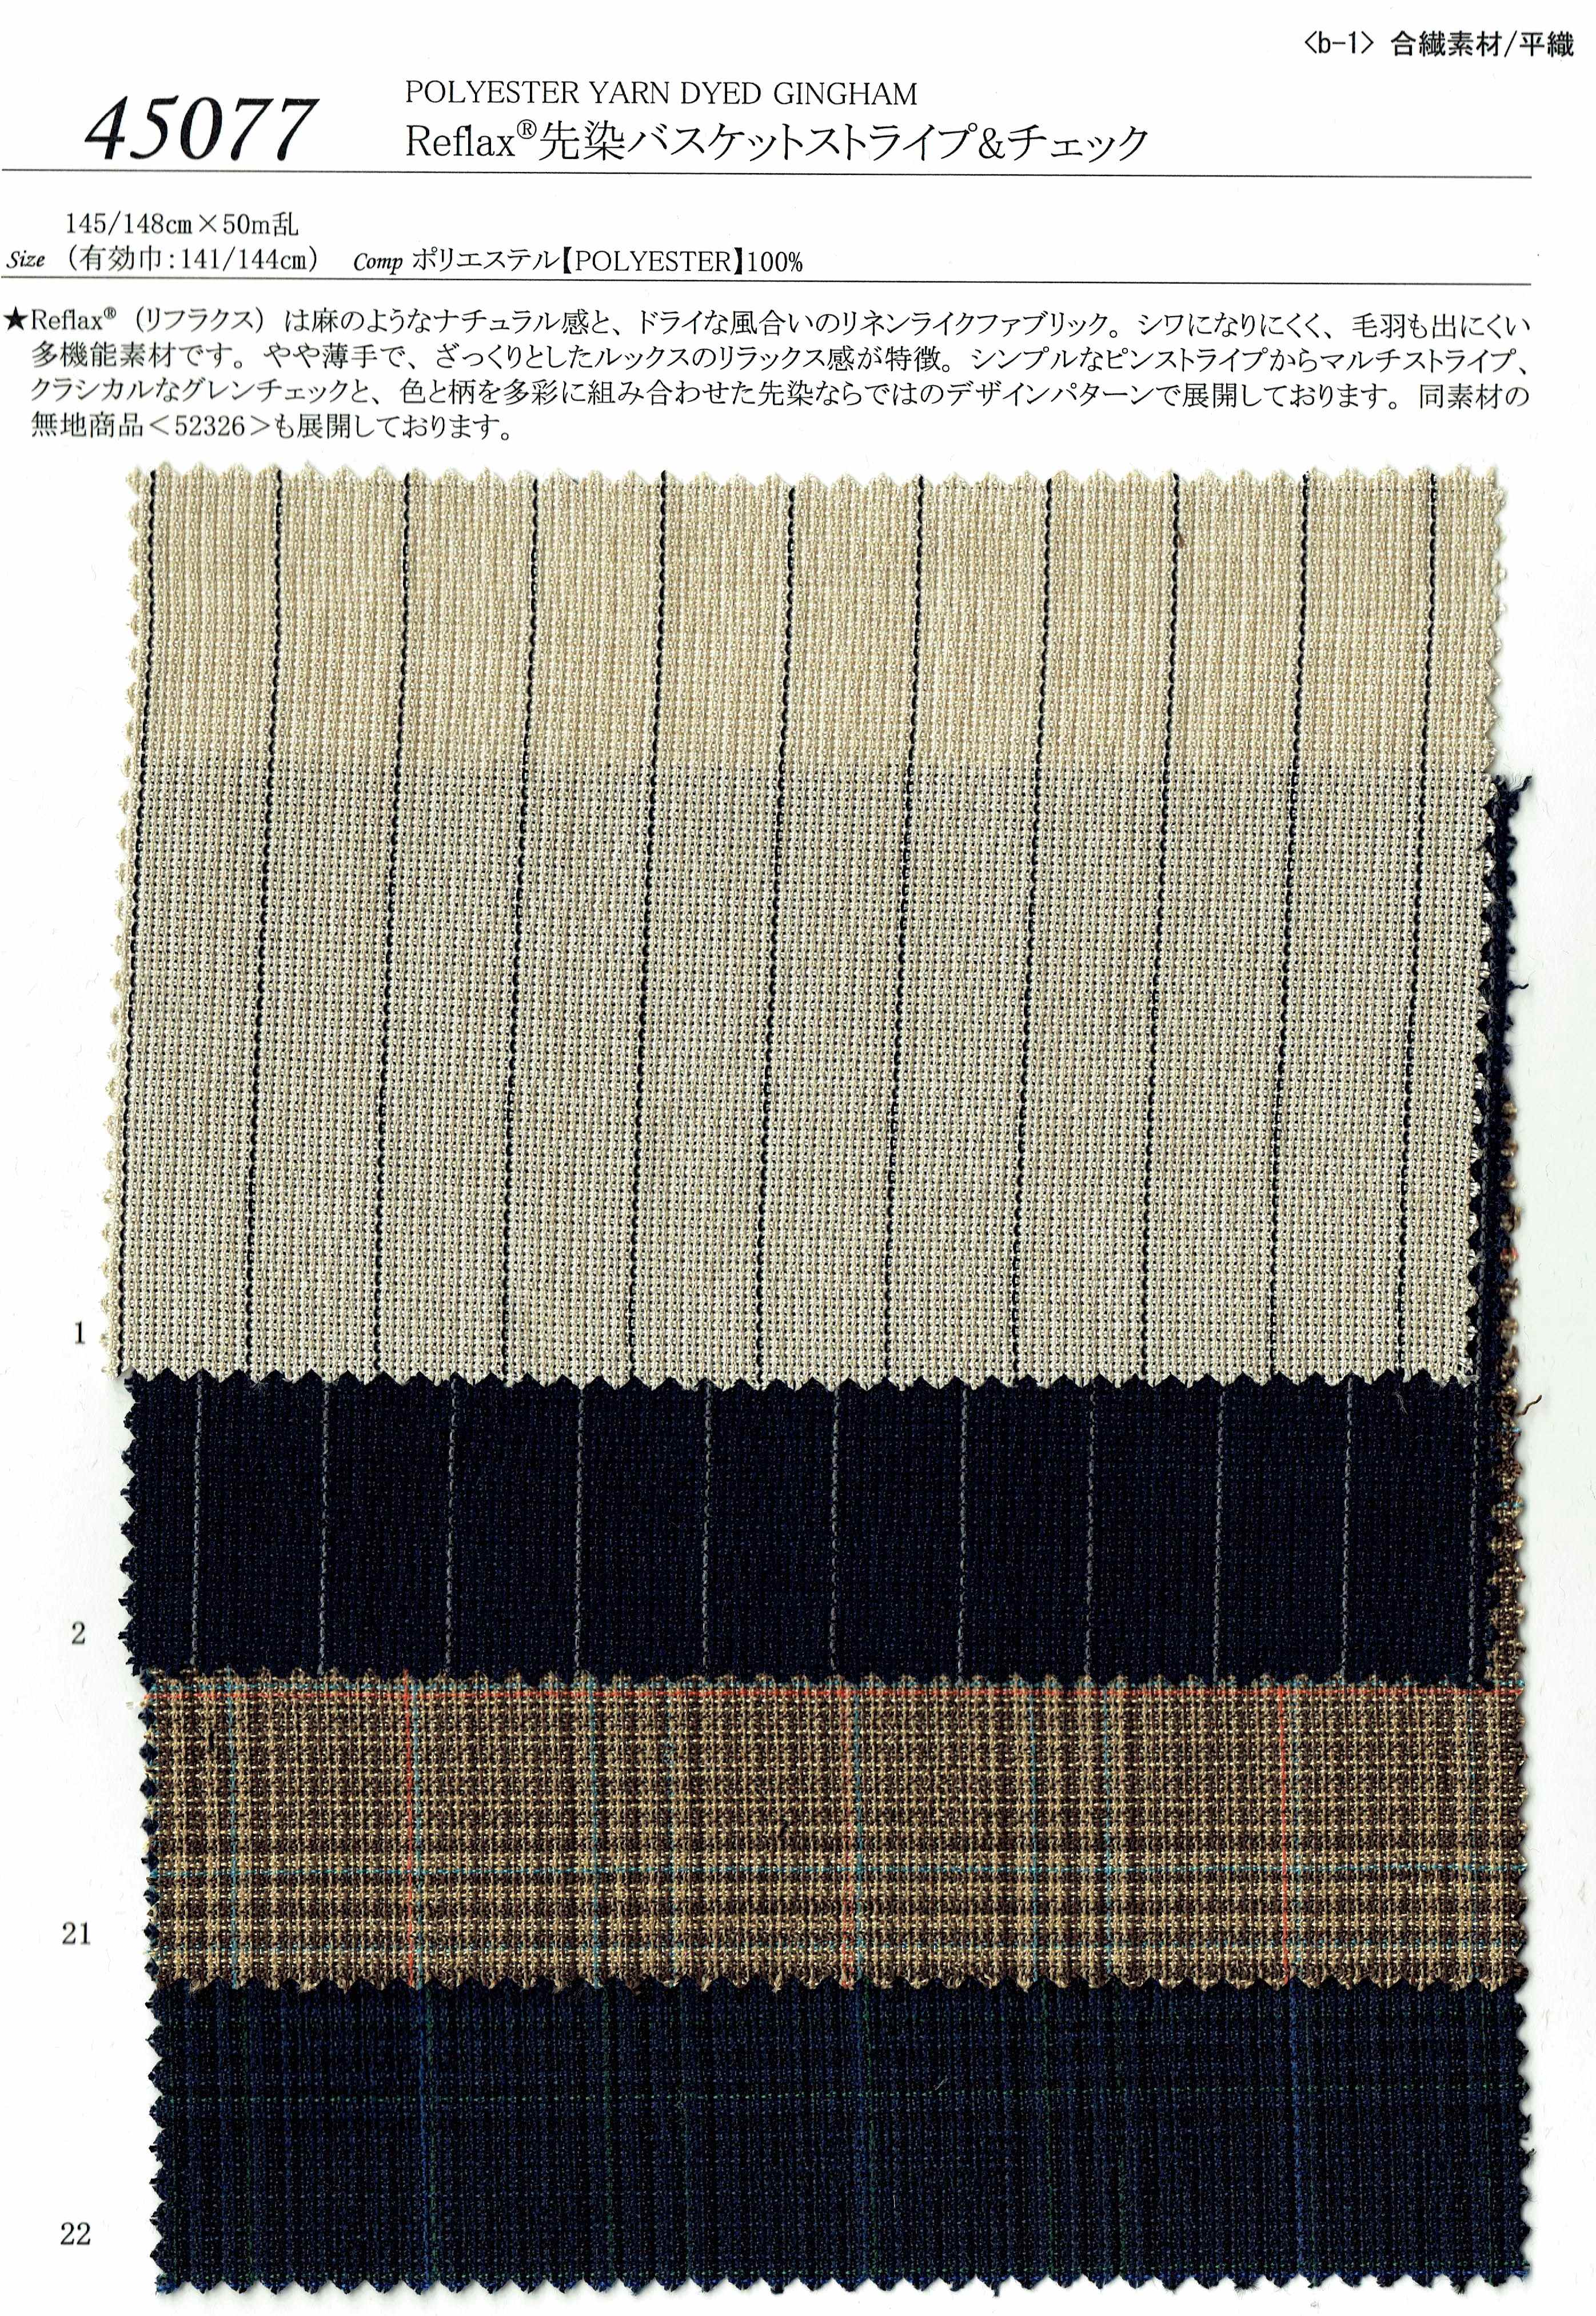 View 100% POLYESTER YARN DYED GINGHAM